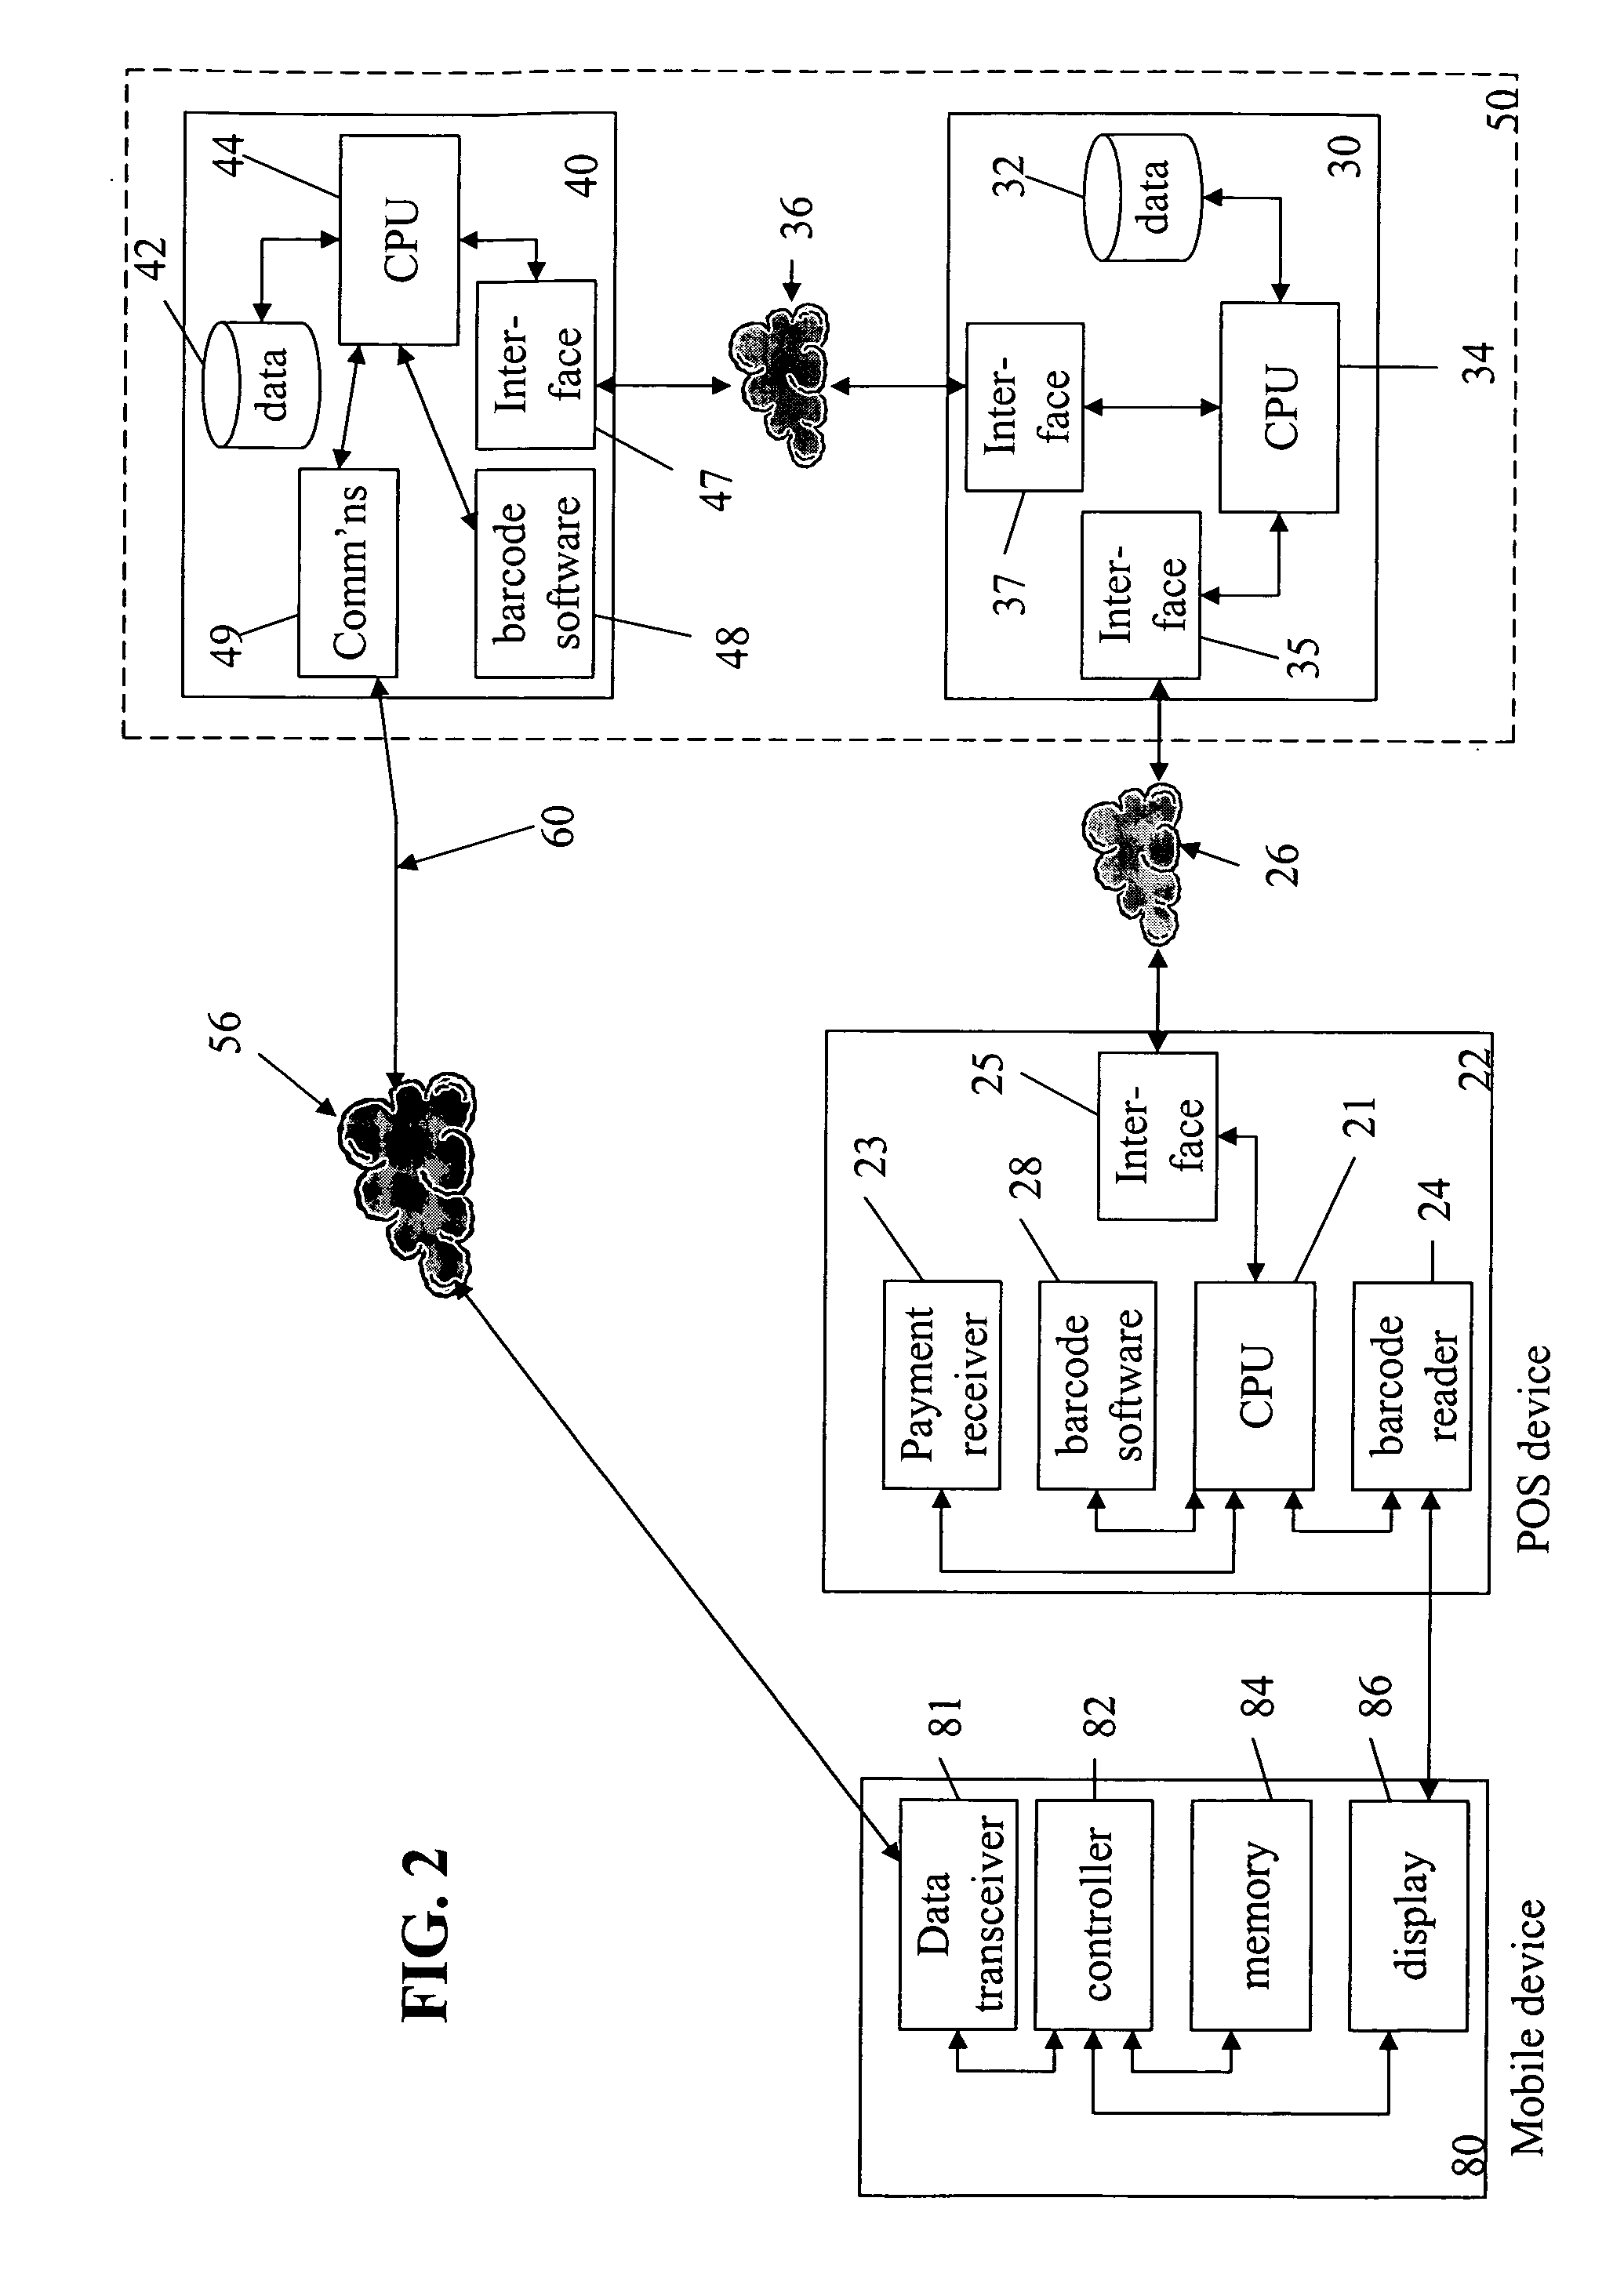 Electronic payment system